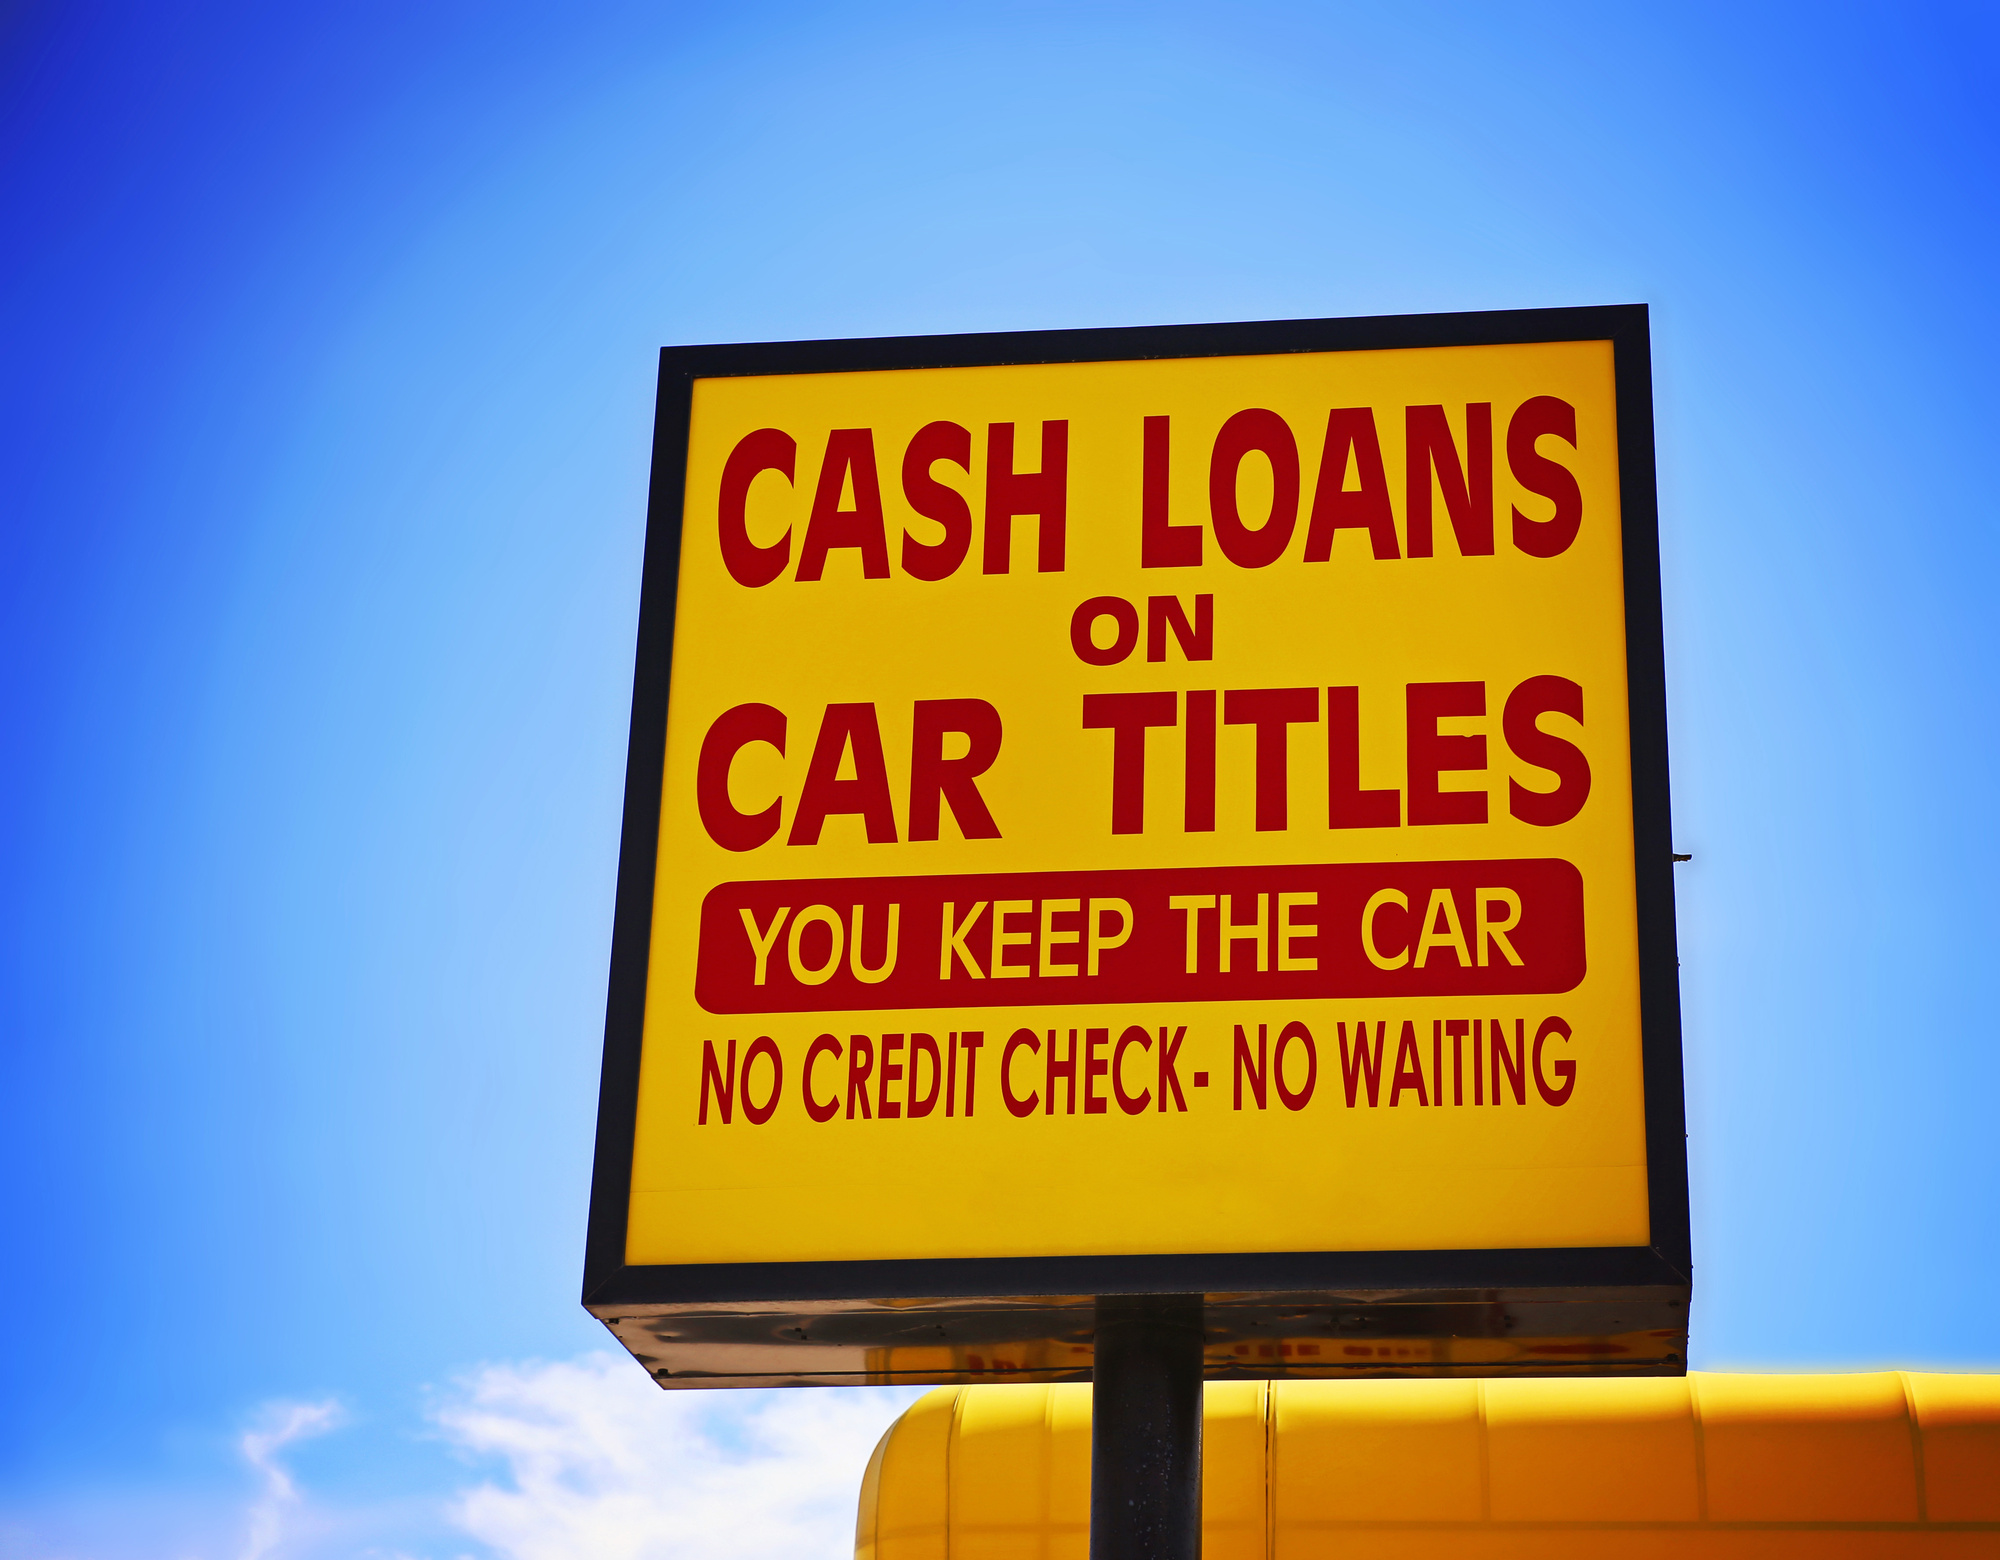 Why Car Title Loan Would Not WorkFor Everyone